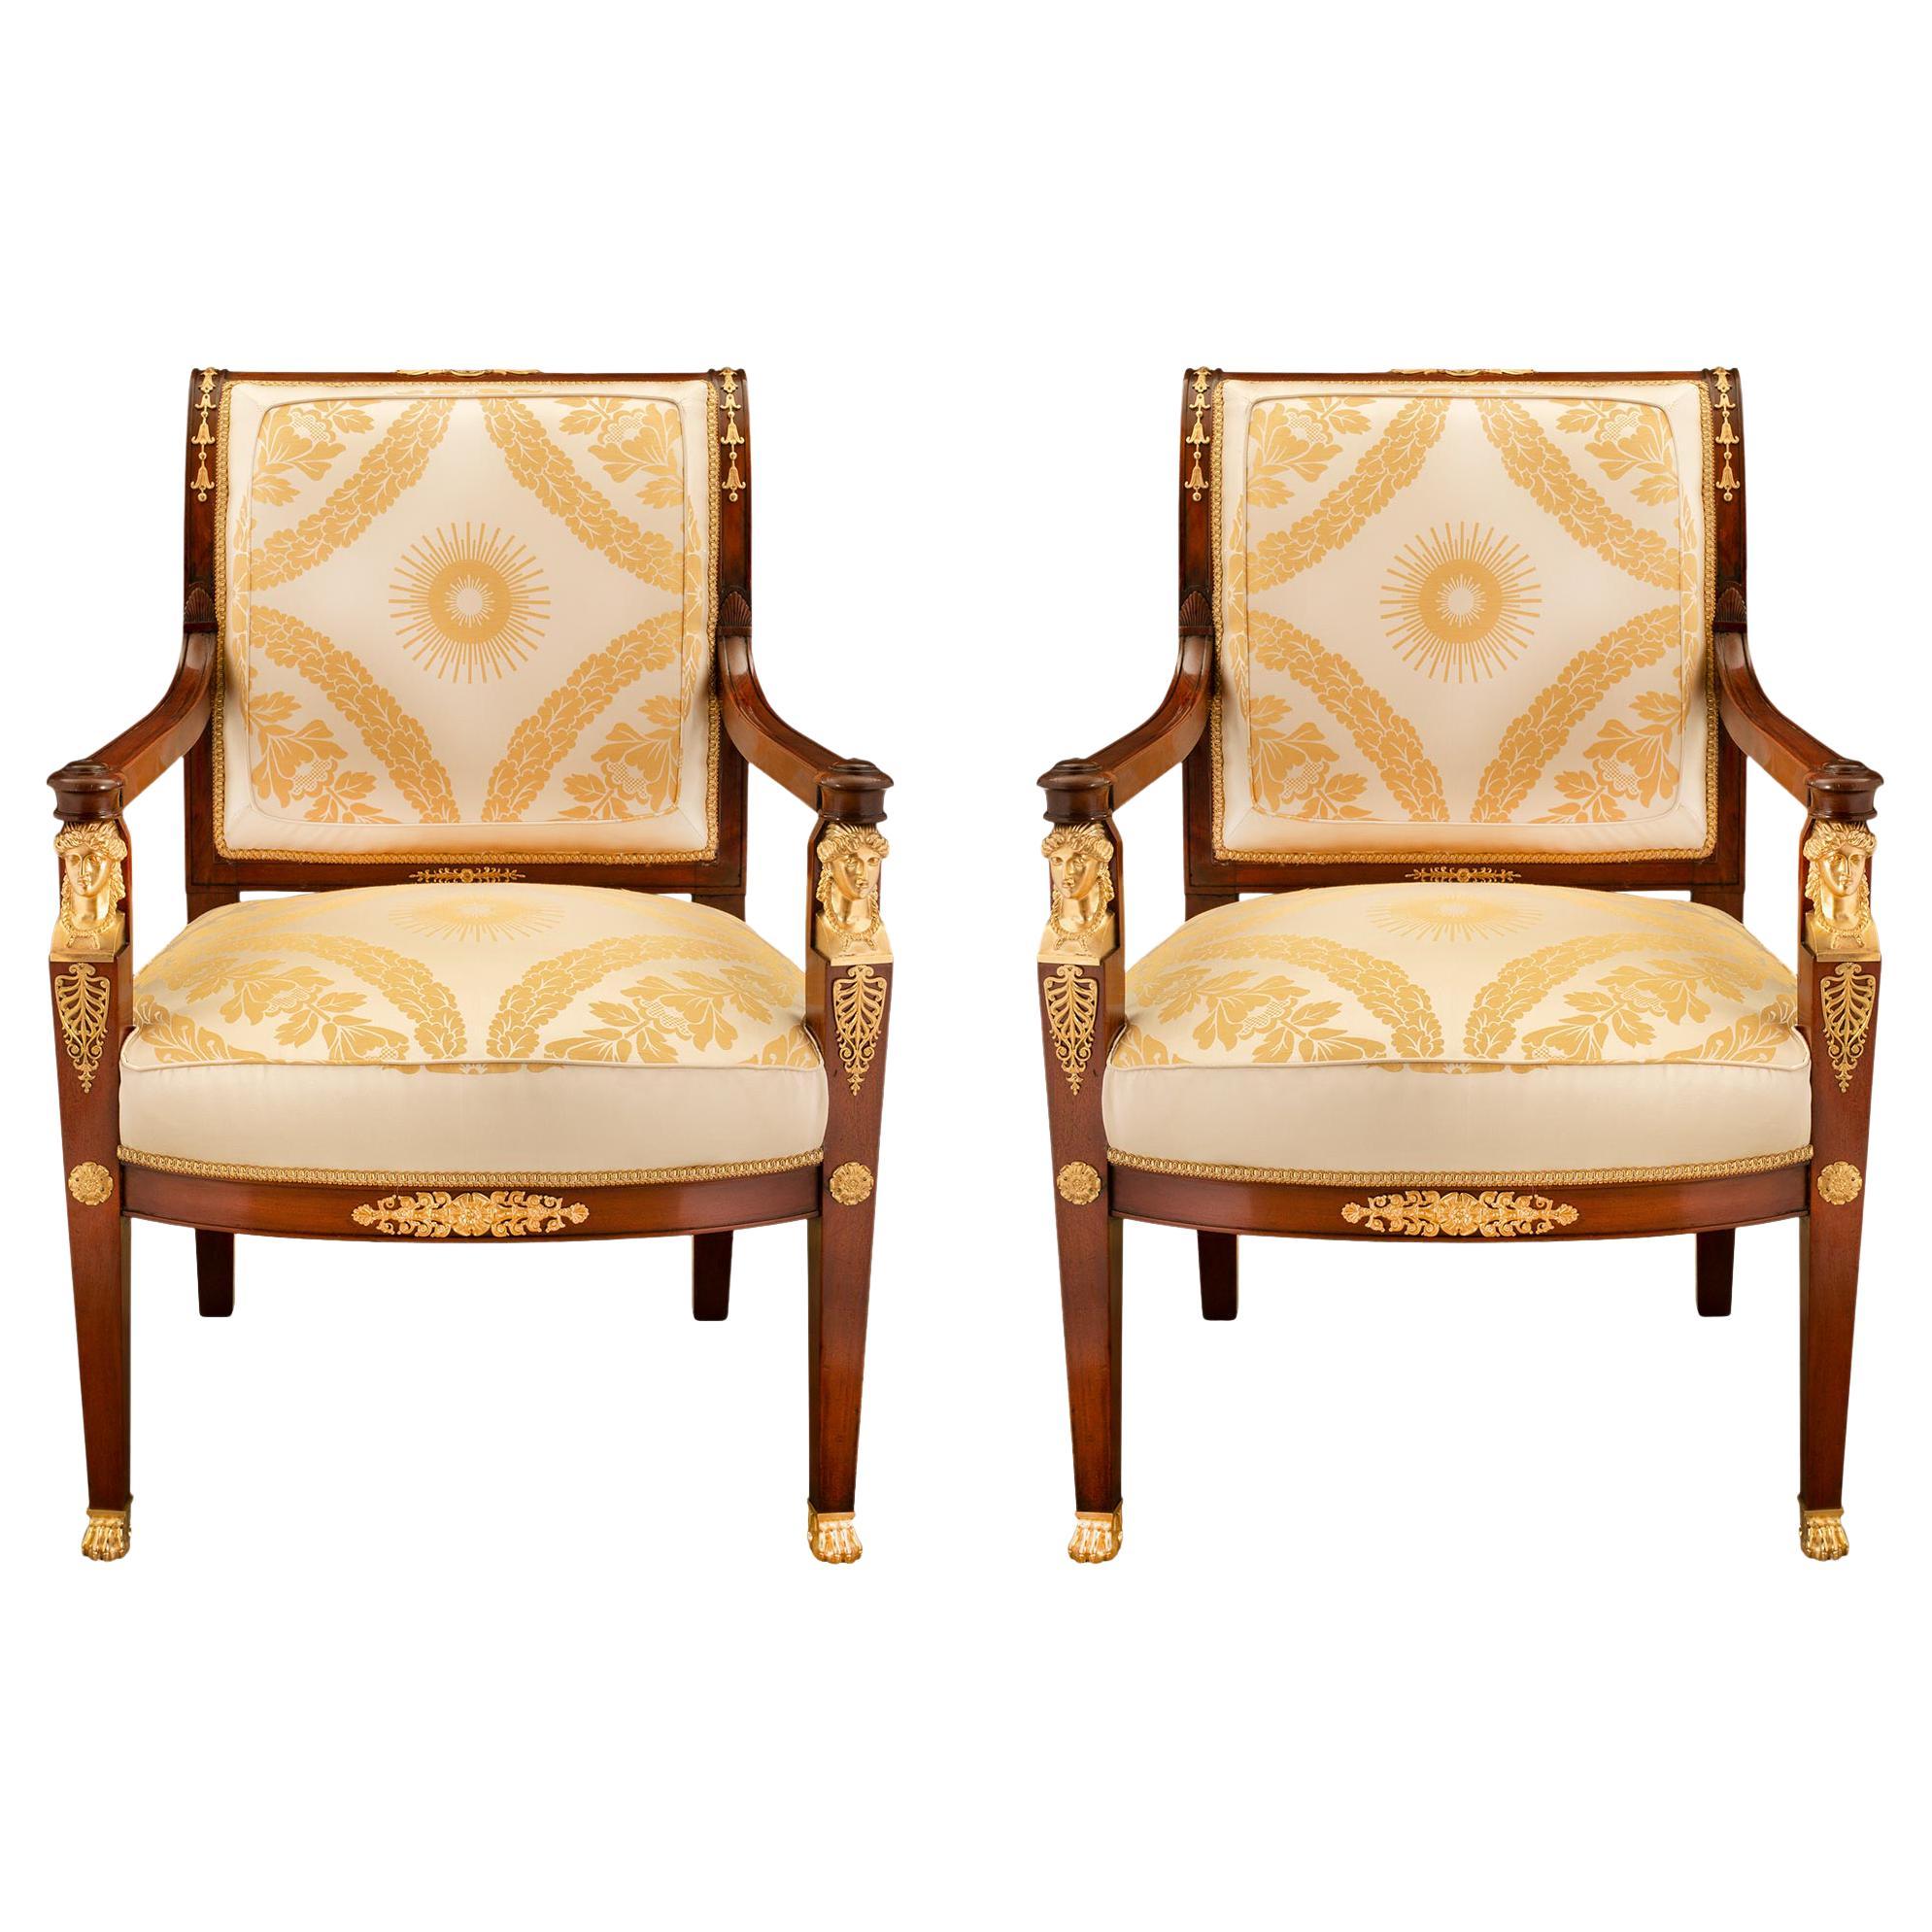 Pair of French Mid 19th Century Empire St. Mahogany and Ormolu Mounted Armchair For Sale